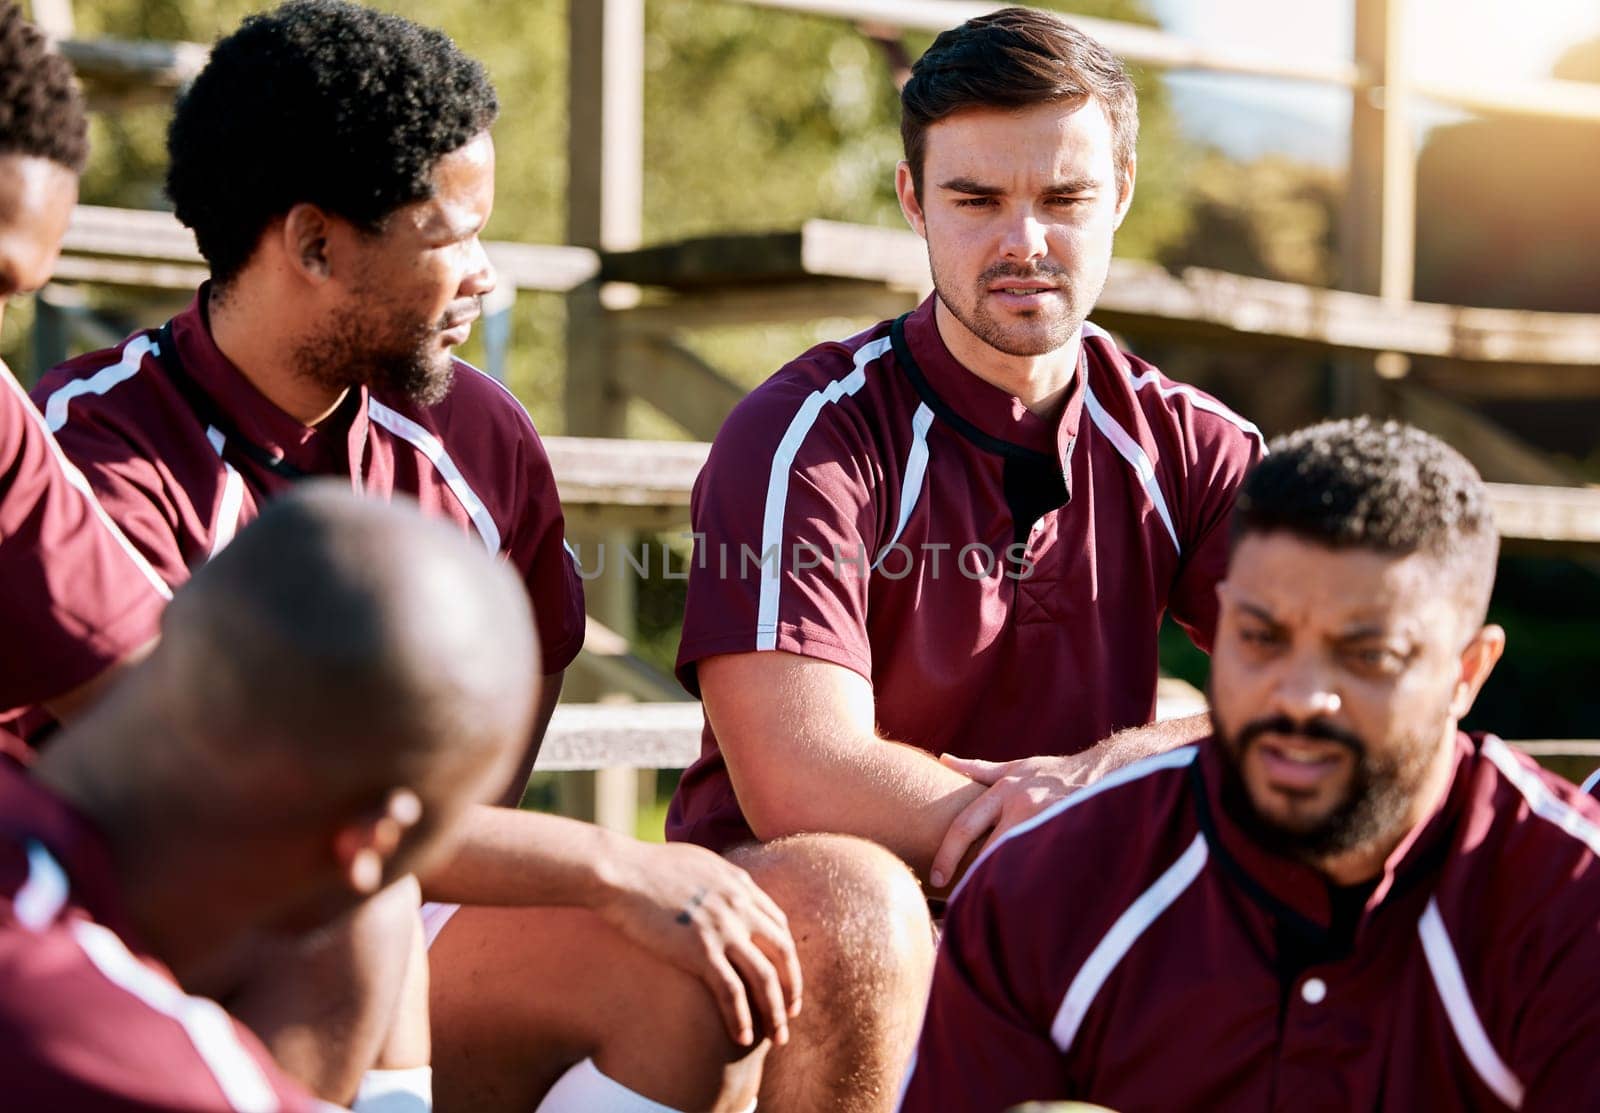 Break, rugby and team of sports men talking, relax and share ideas for training at a field. Fitness, friends and man group discuss game strategy before match, workout and planning practice in huddle by YuriArcurs